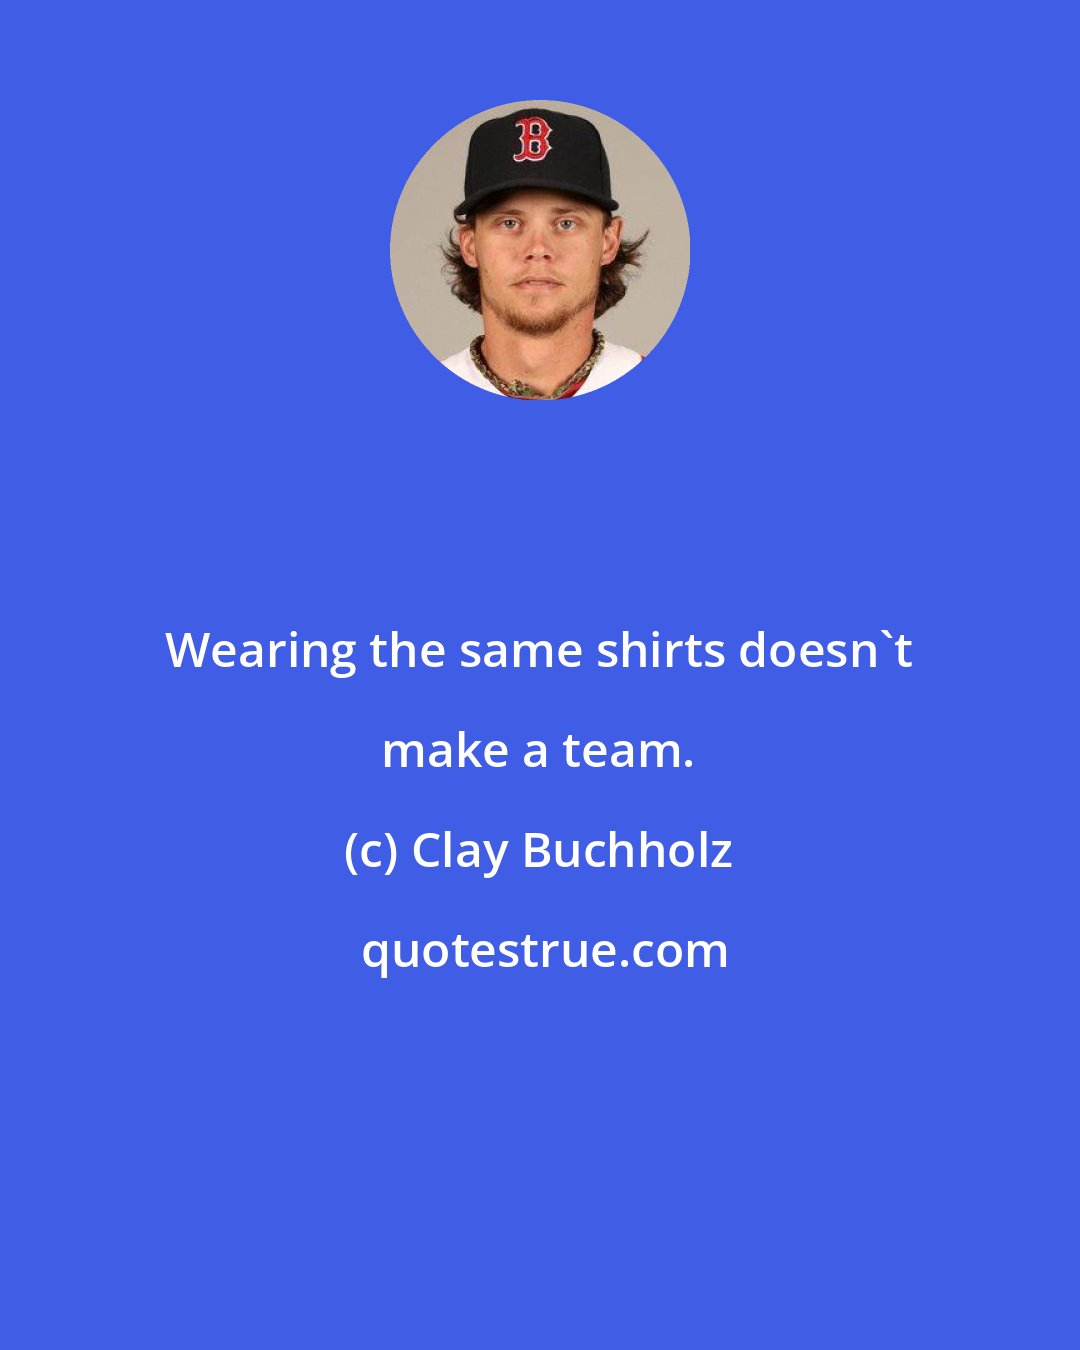 Clay Buchholz: Wearing the same shirts doesn't make a team.